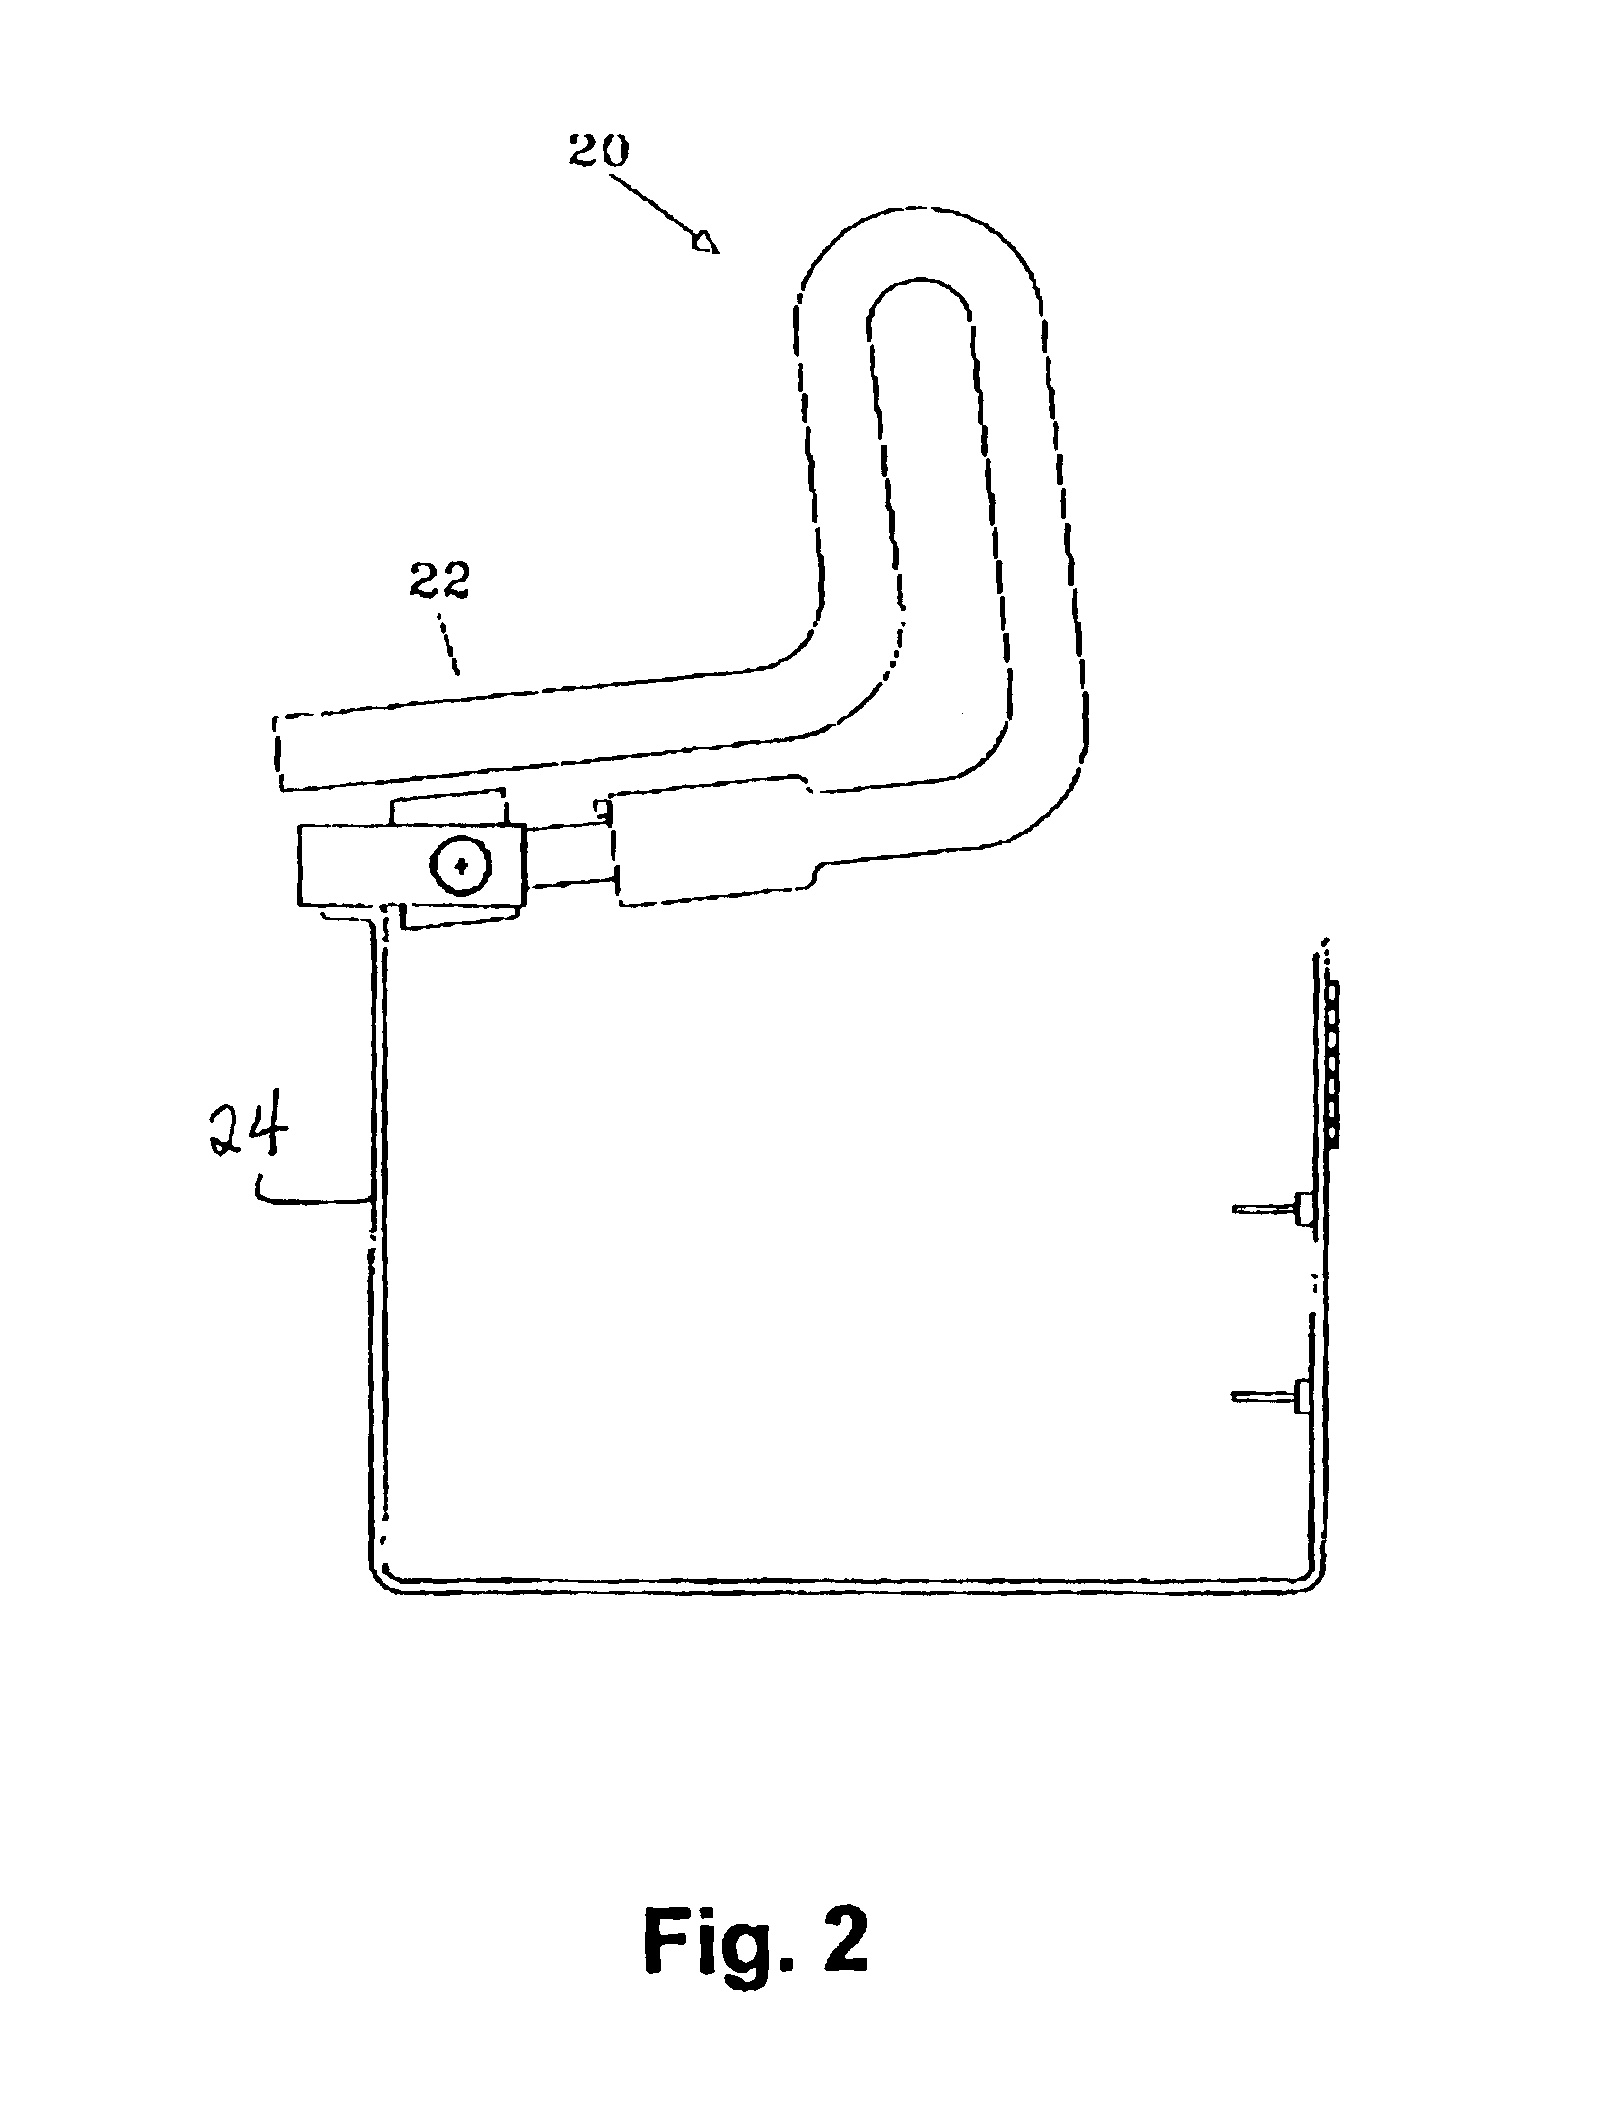 Frying apparatus with closed loop combustion control and method